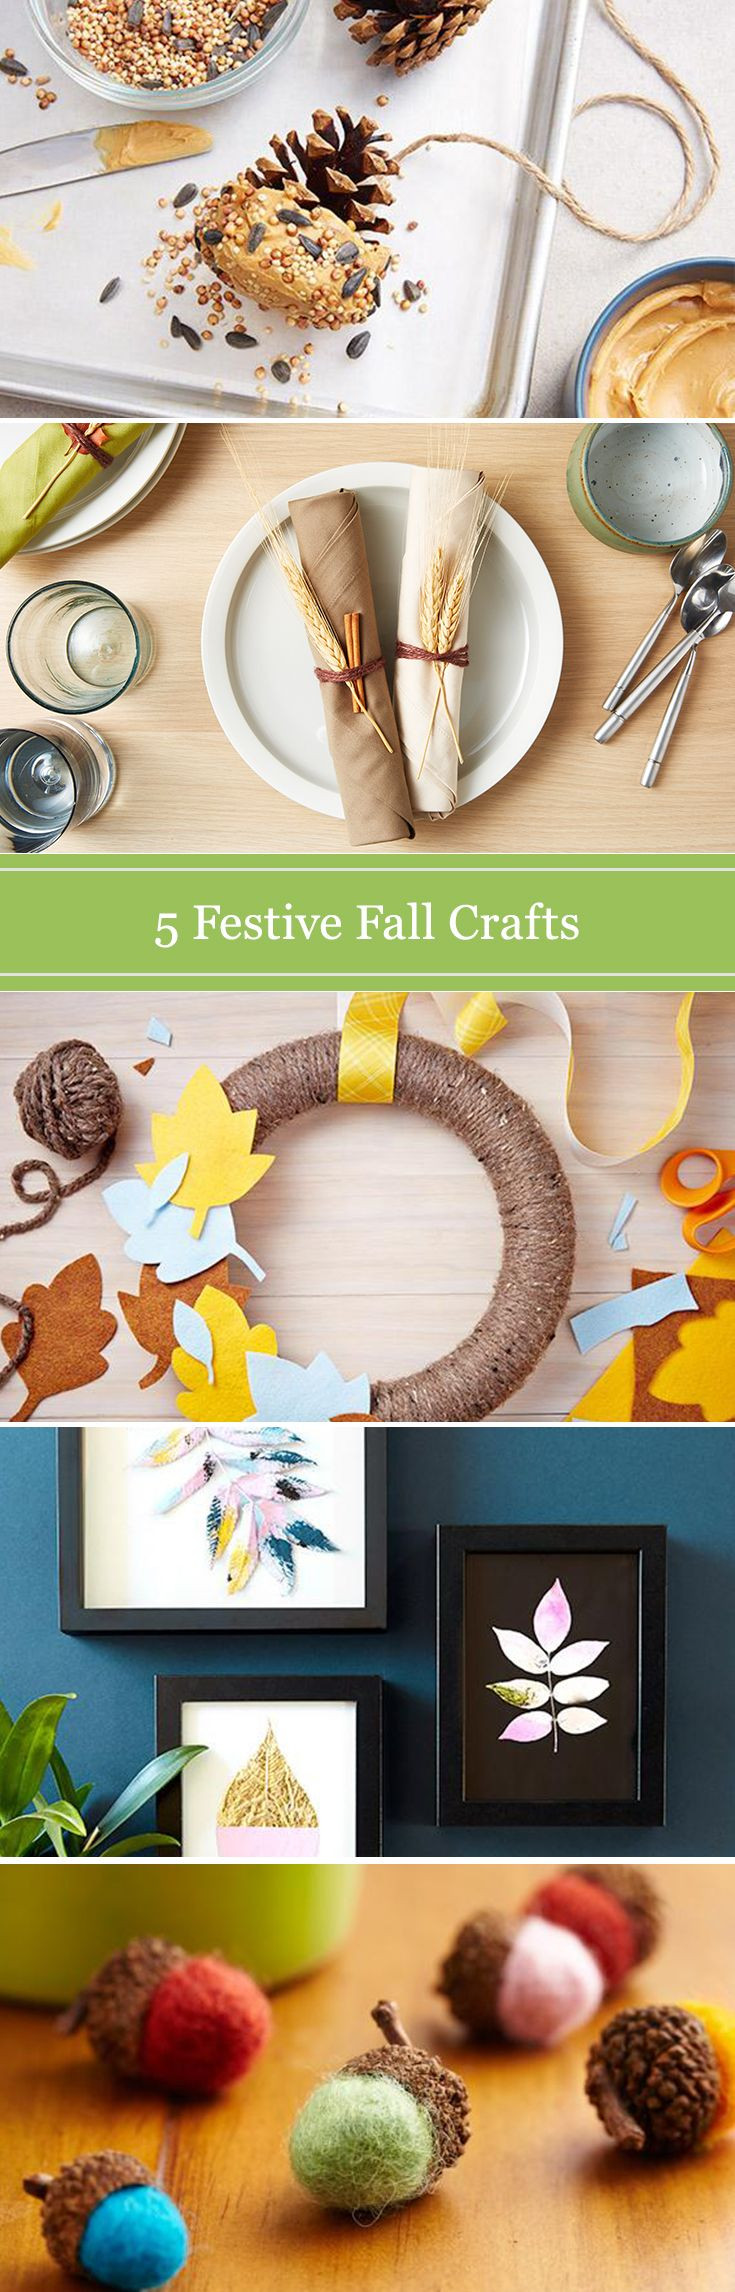 Craft Activities For Adults
 51 best Craft Ideas for Adults images on Pinterest